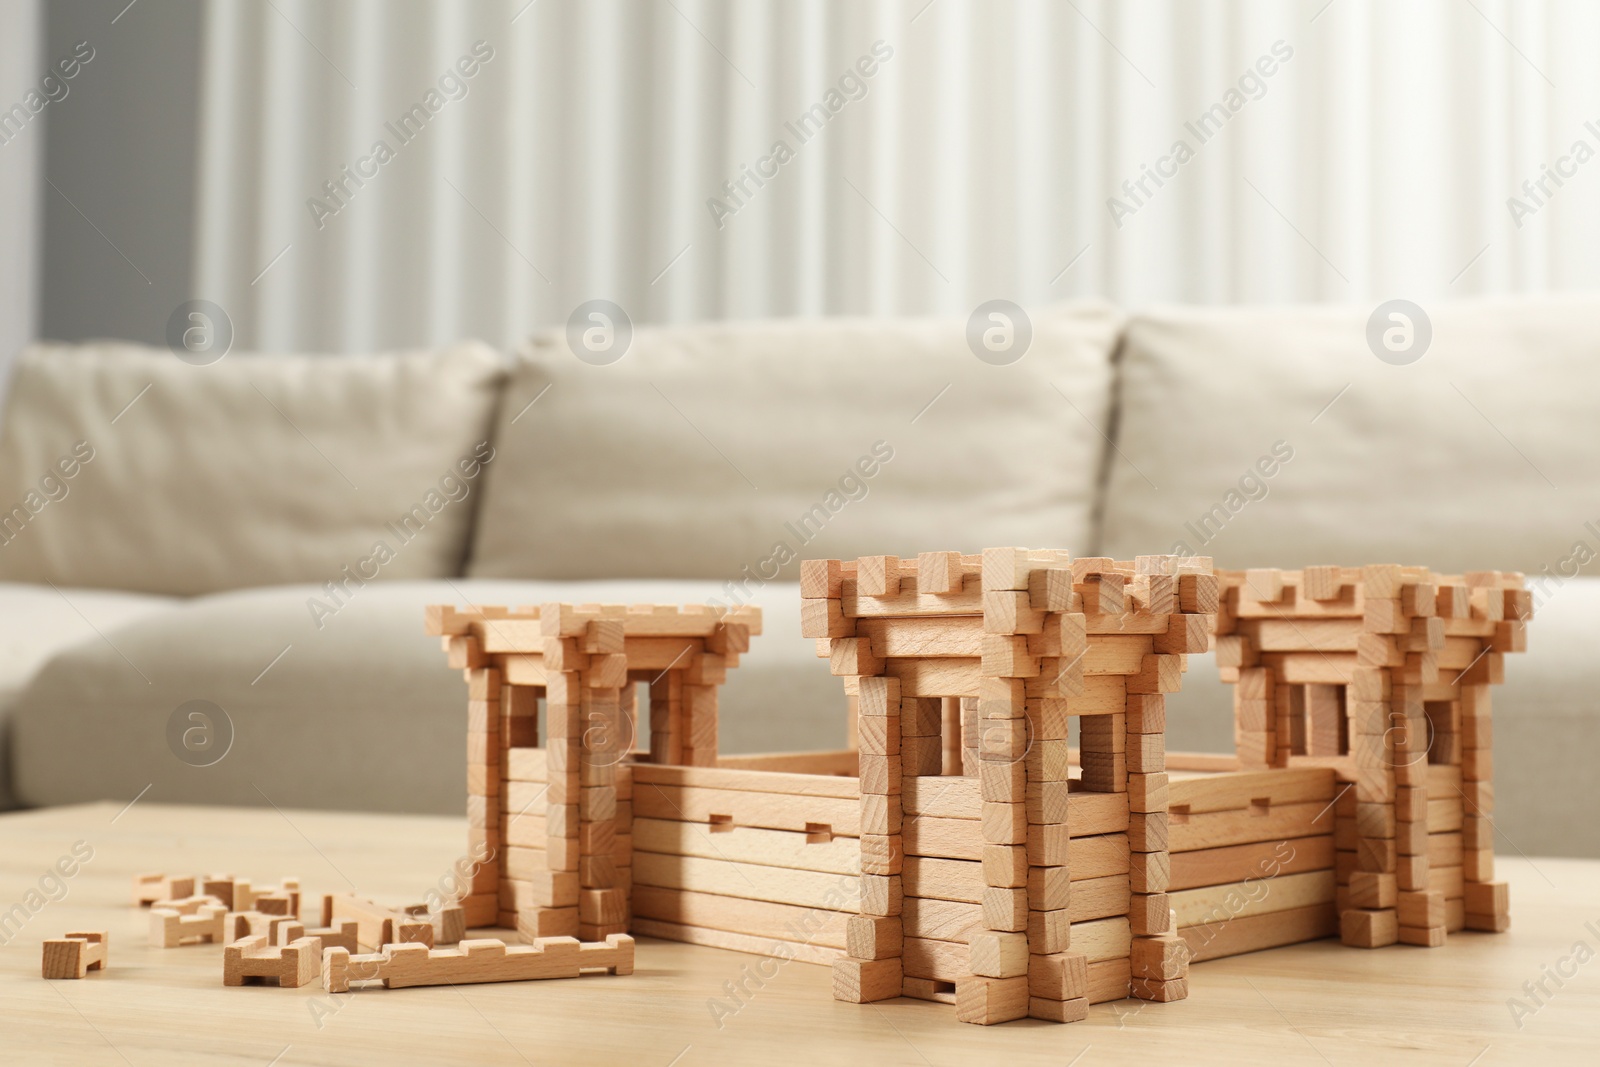 Photo of Wooden fortress and building blocks on table indoors. Children's toy